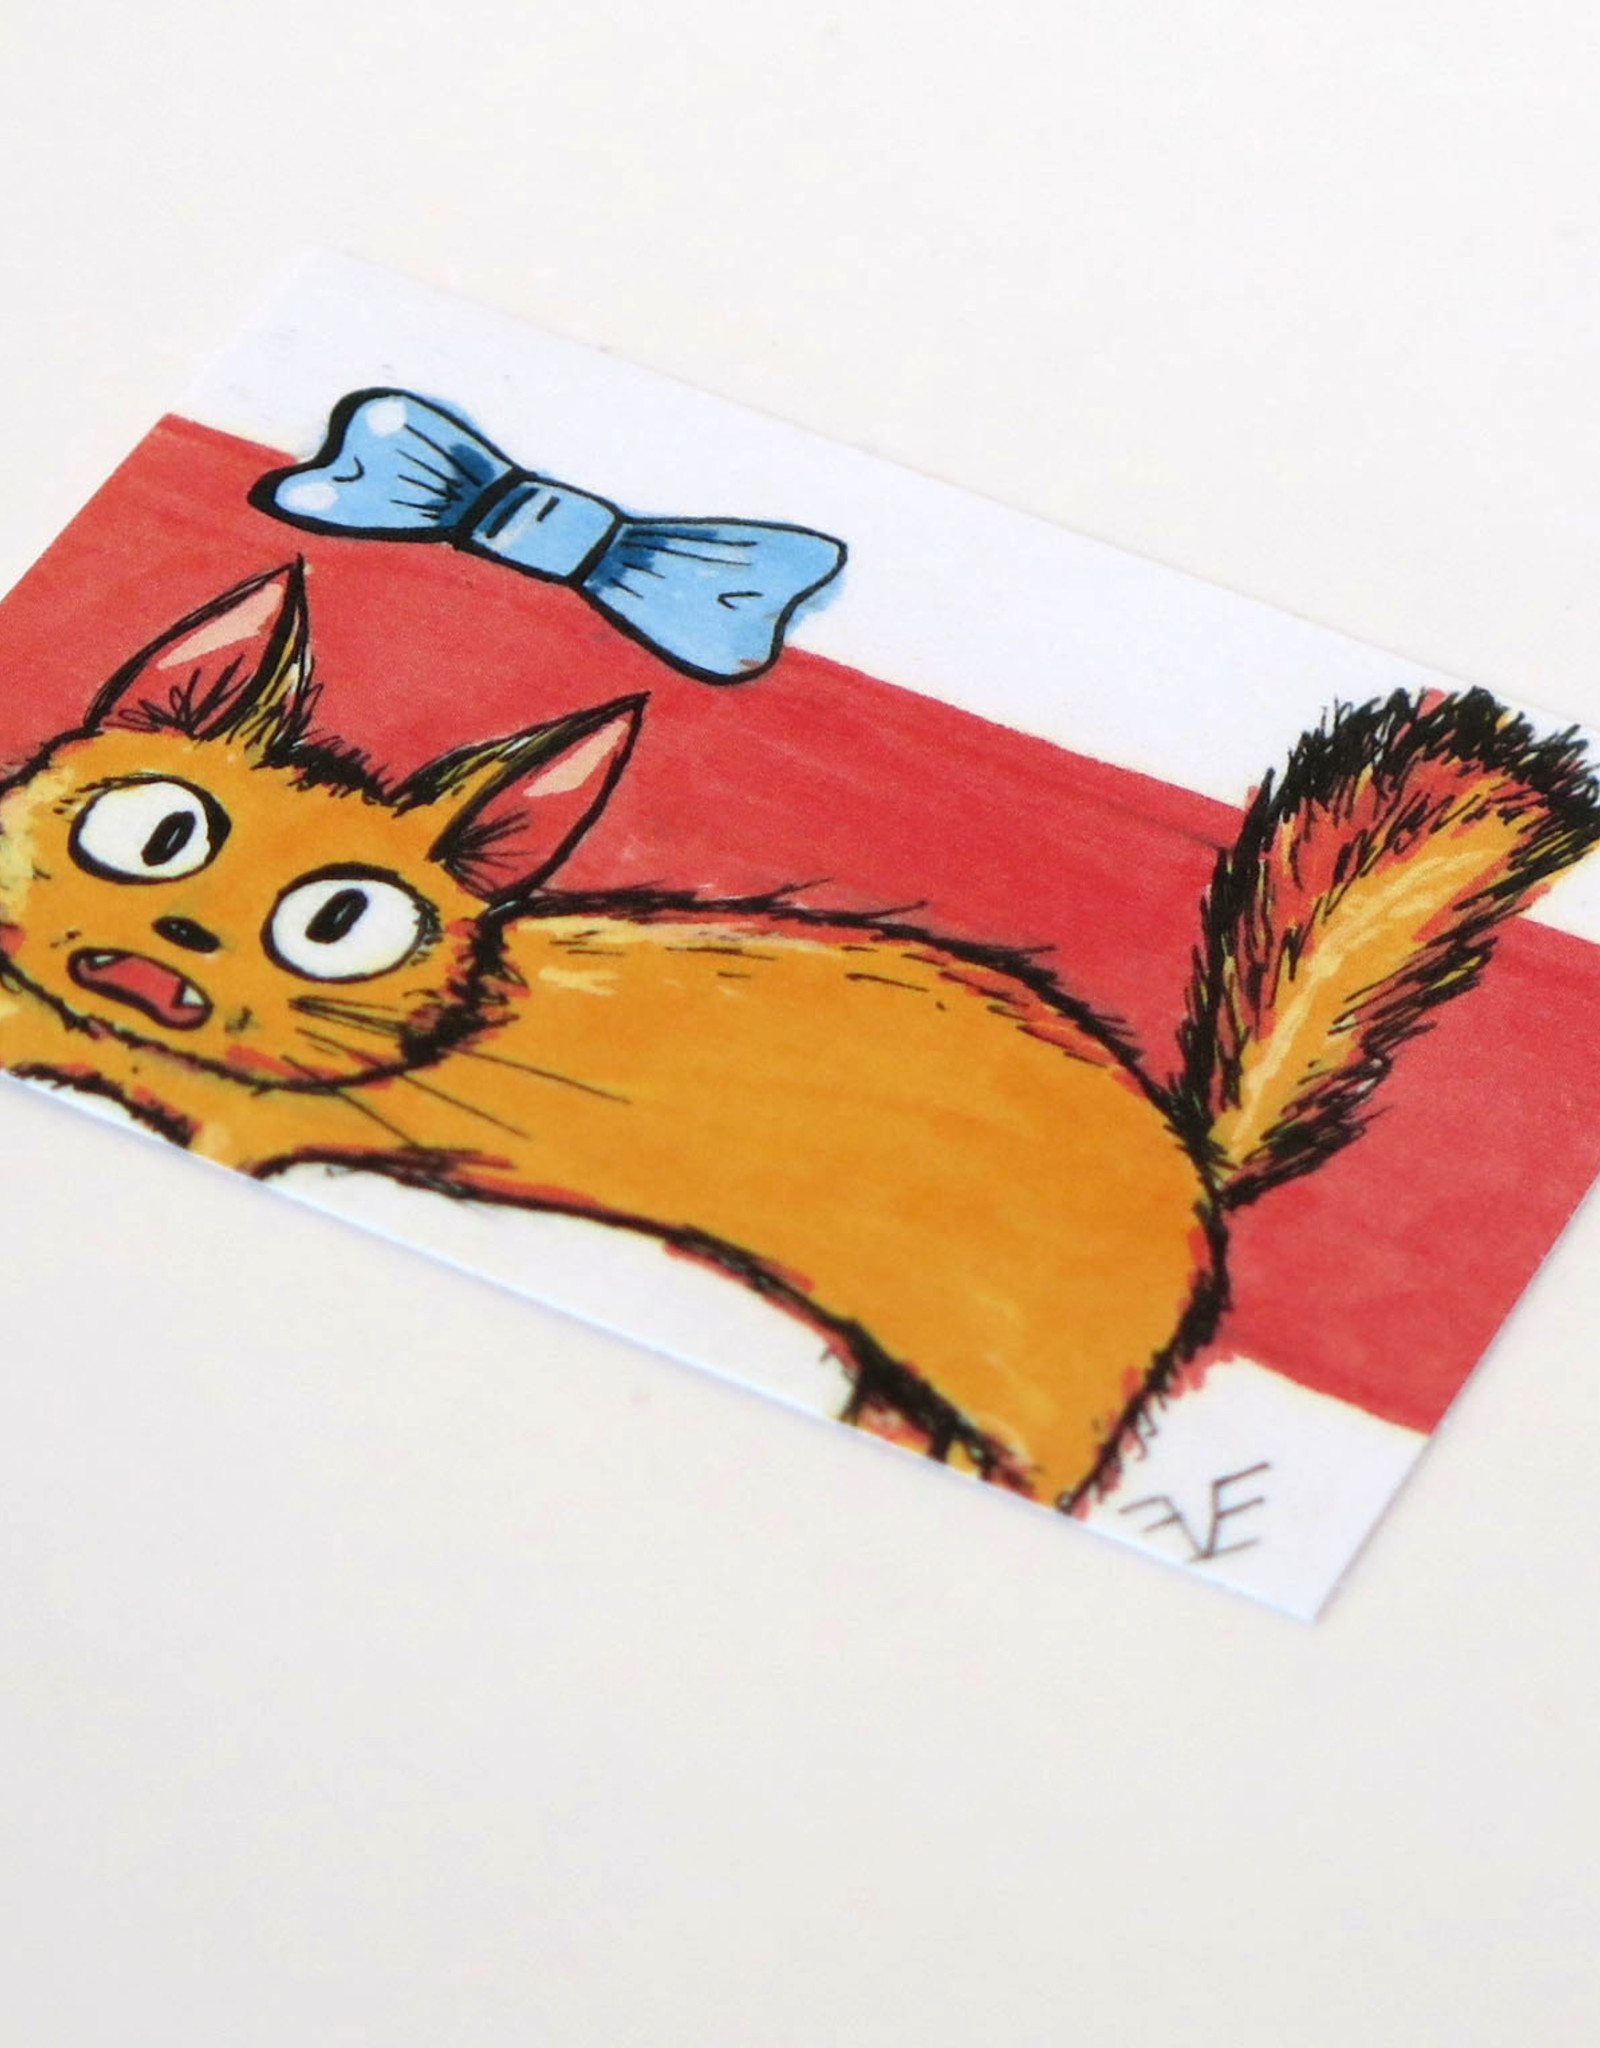 "Cat with bow" Small Art Card by evesoup studio